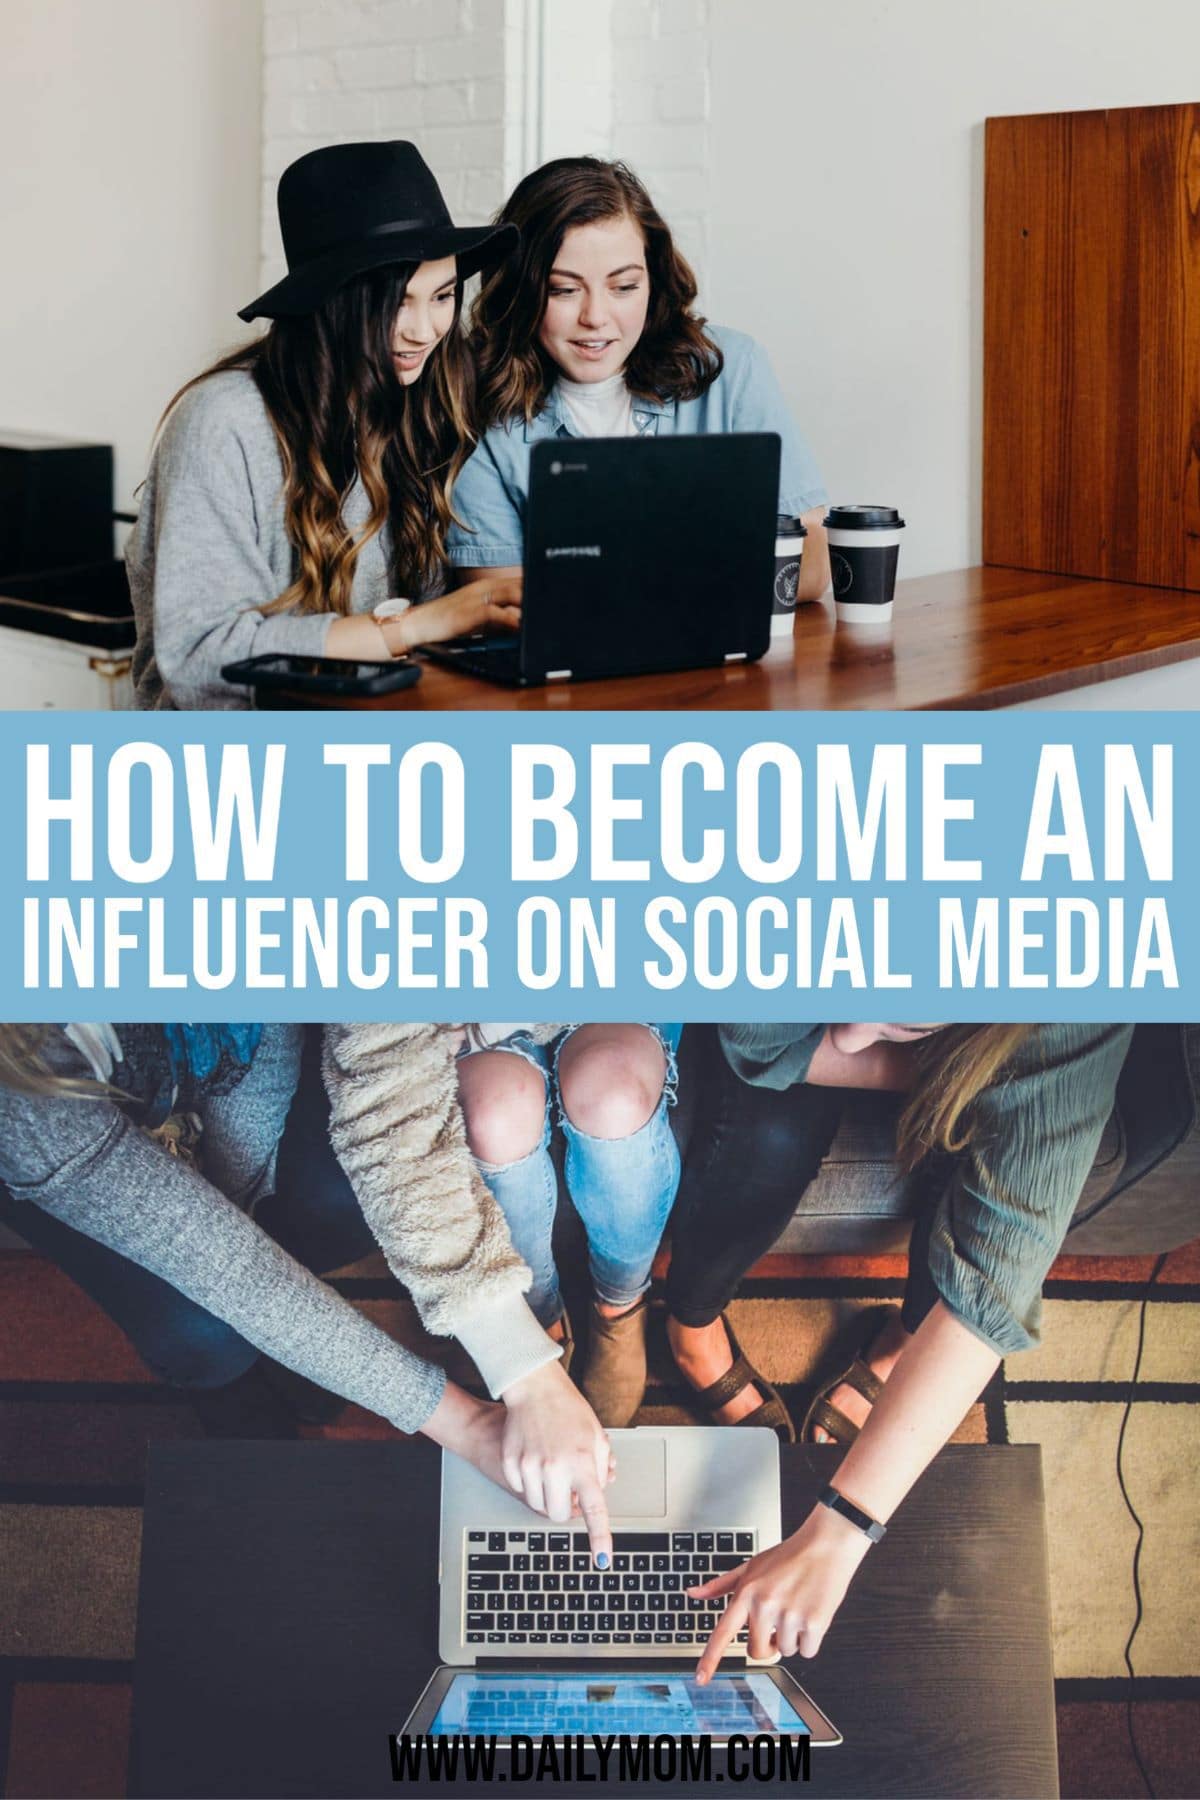 How To Become An Influencer On Social Media